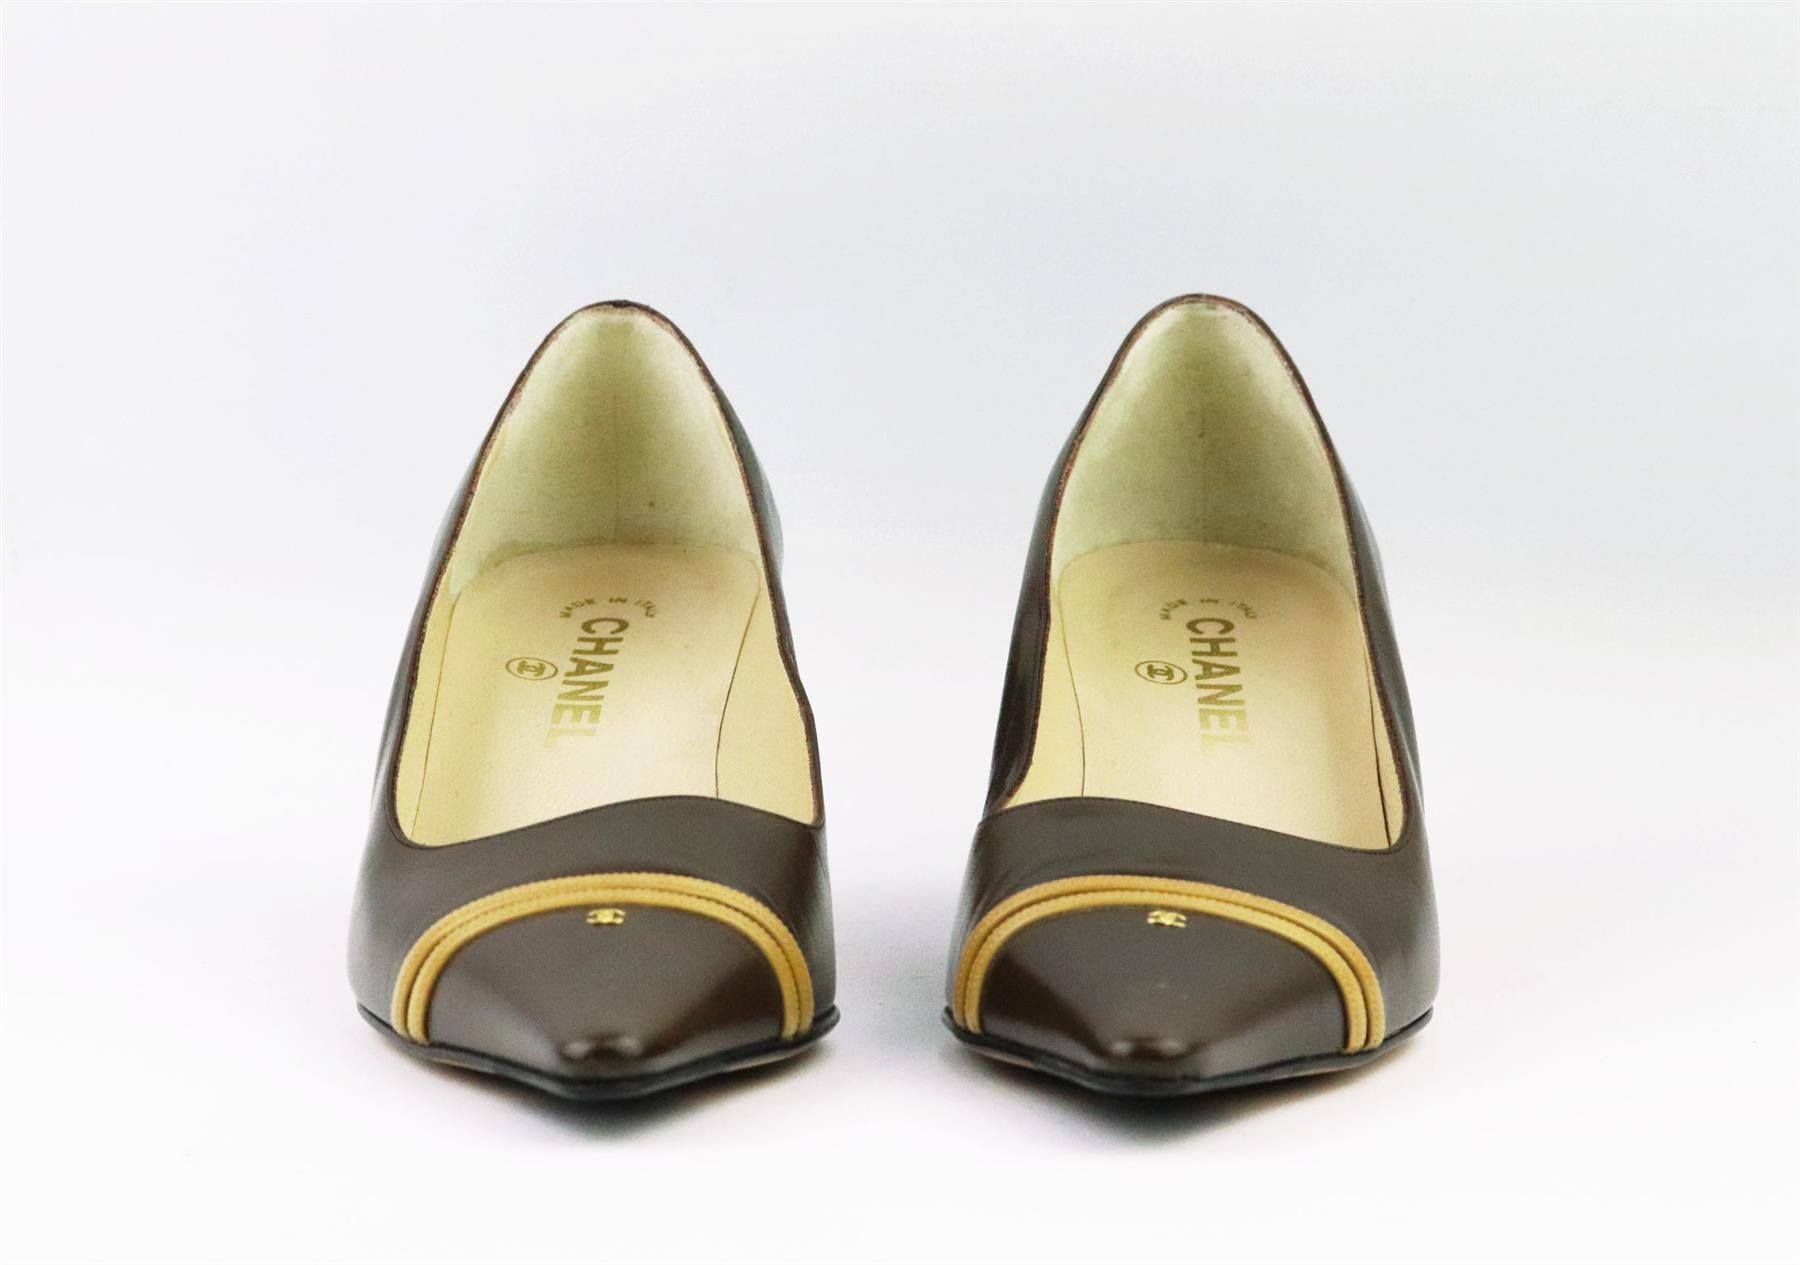 These vintage pumps by Chanel have been made in Italy from beige and brown leather, they're set on a small structured metal stiletto heel that's balanced with a pointed toe and striped CC detail on the front. Heel measures approximately 50 mm/ 2